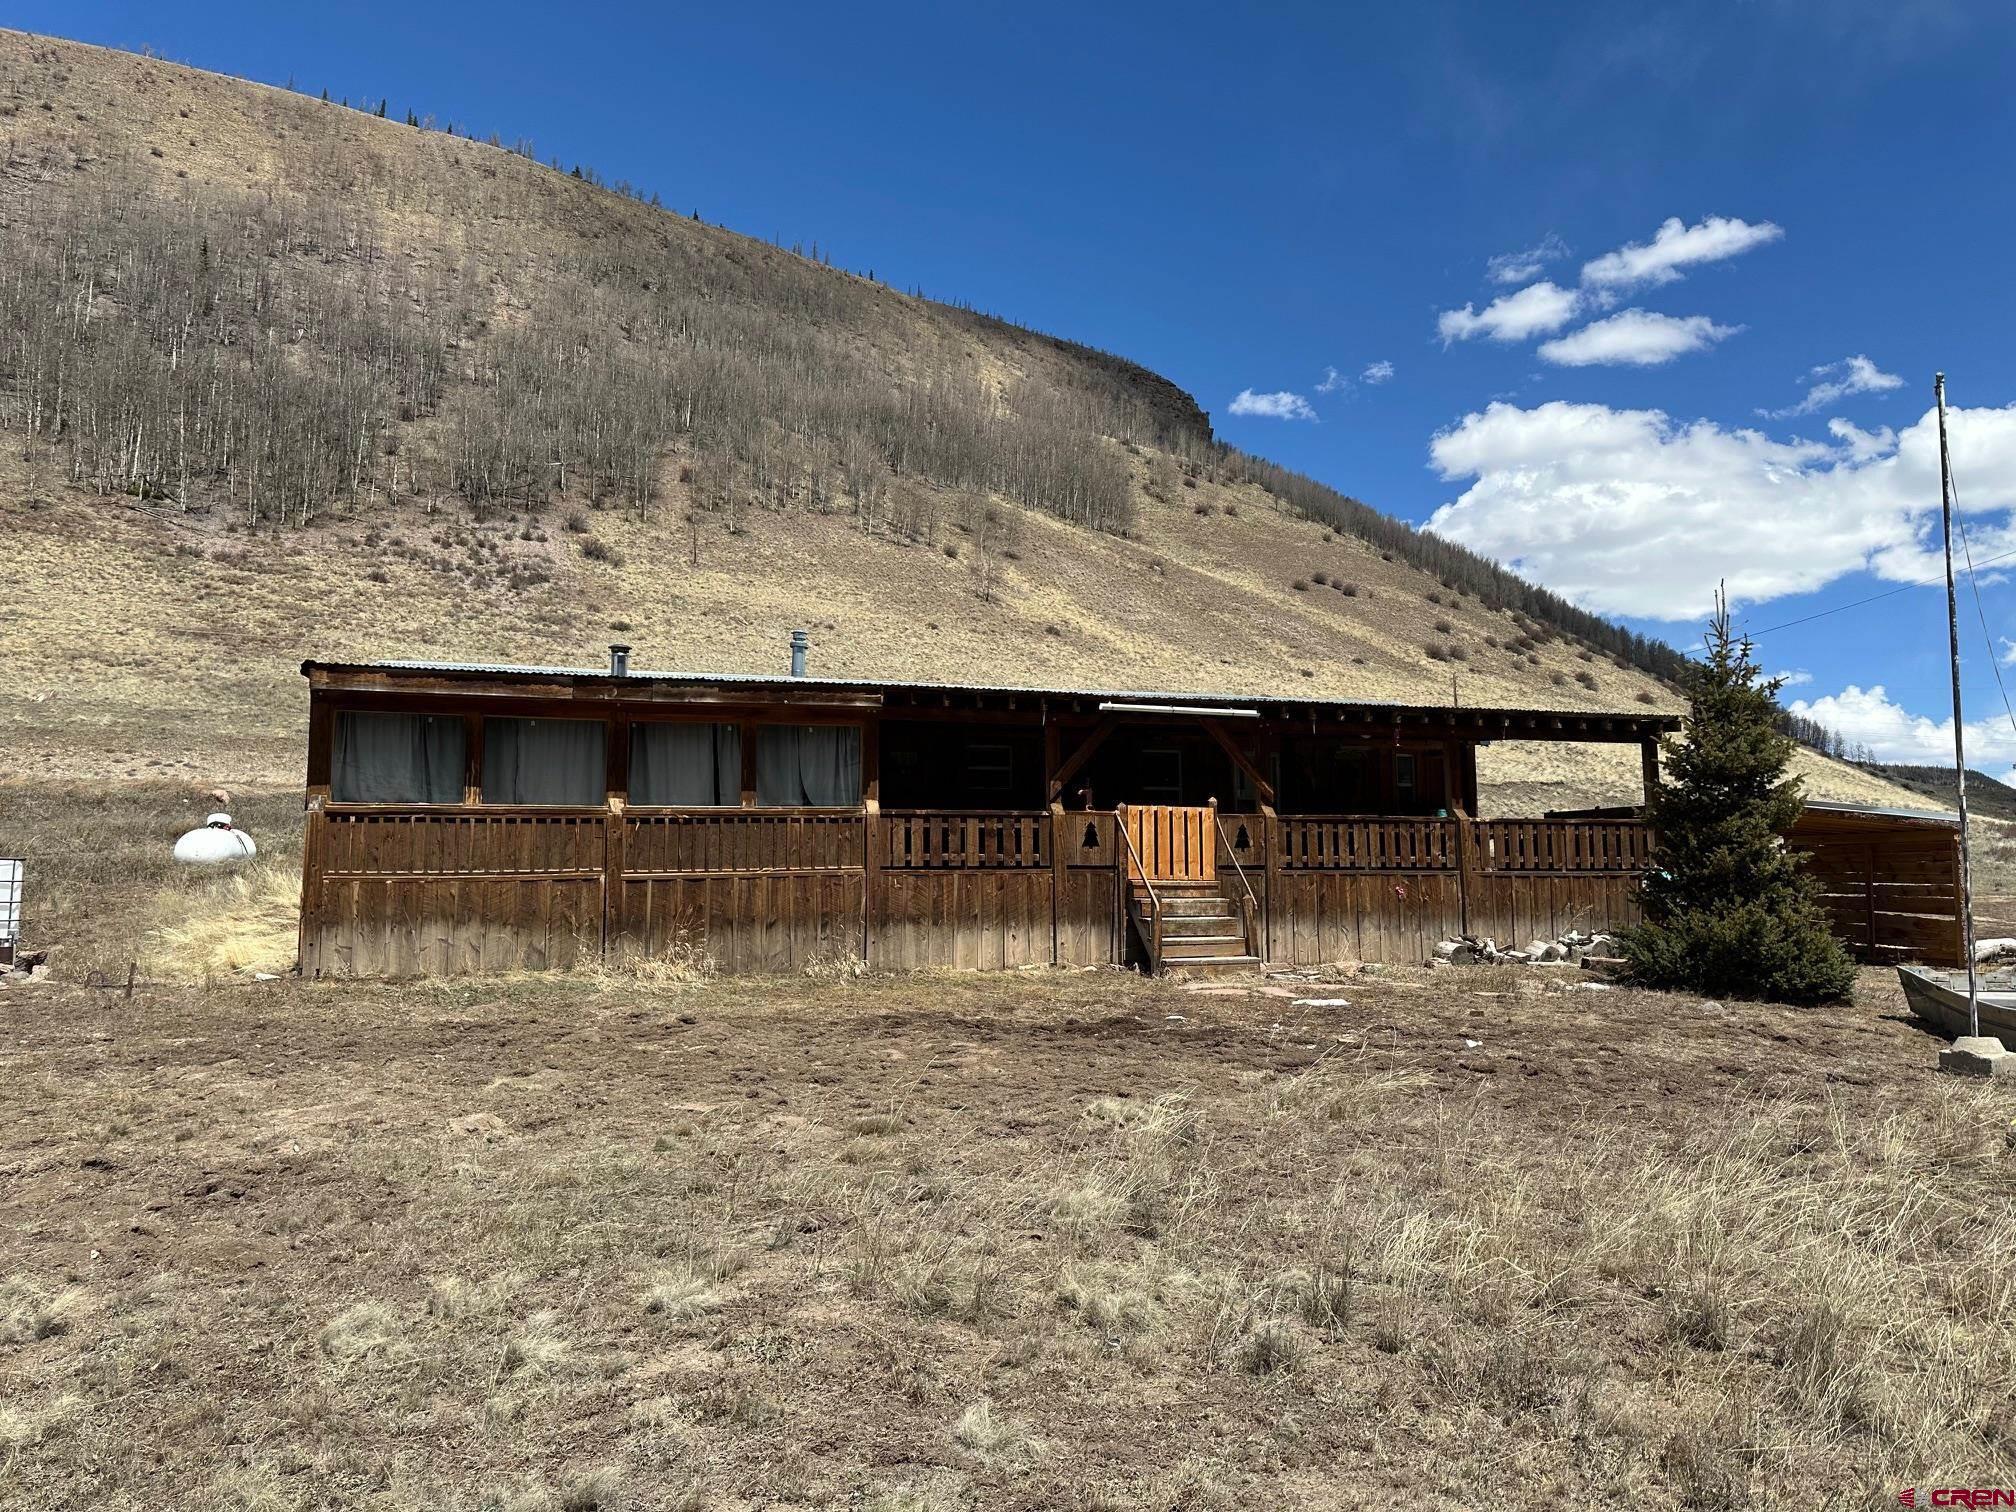 Photo of 4100 Usfs Road 515 Hermit Lks #180 in Creede, CO